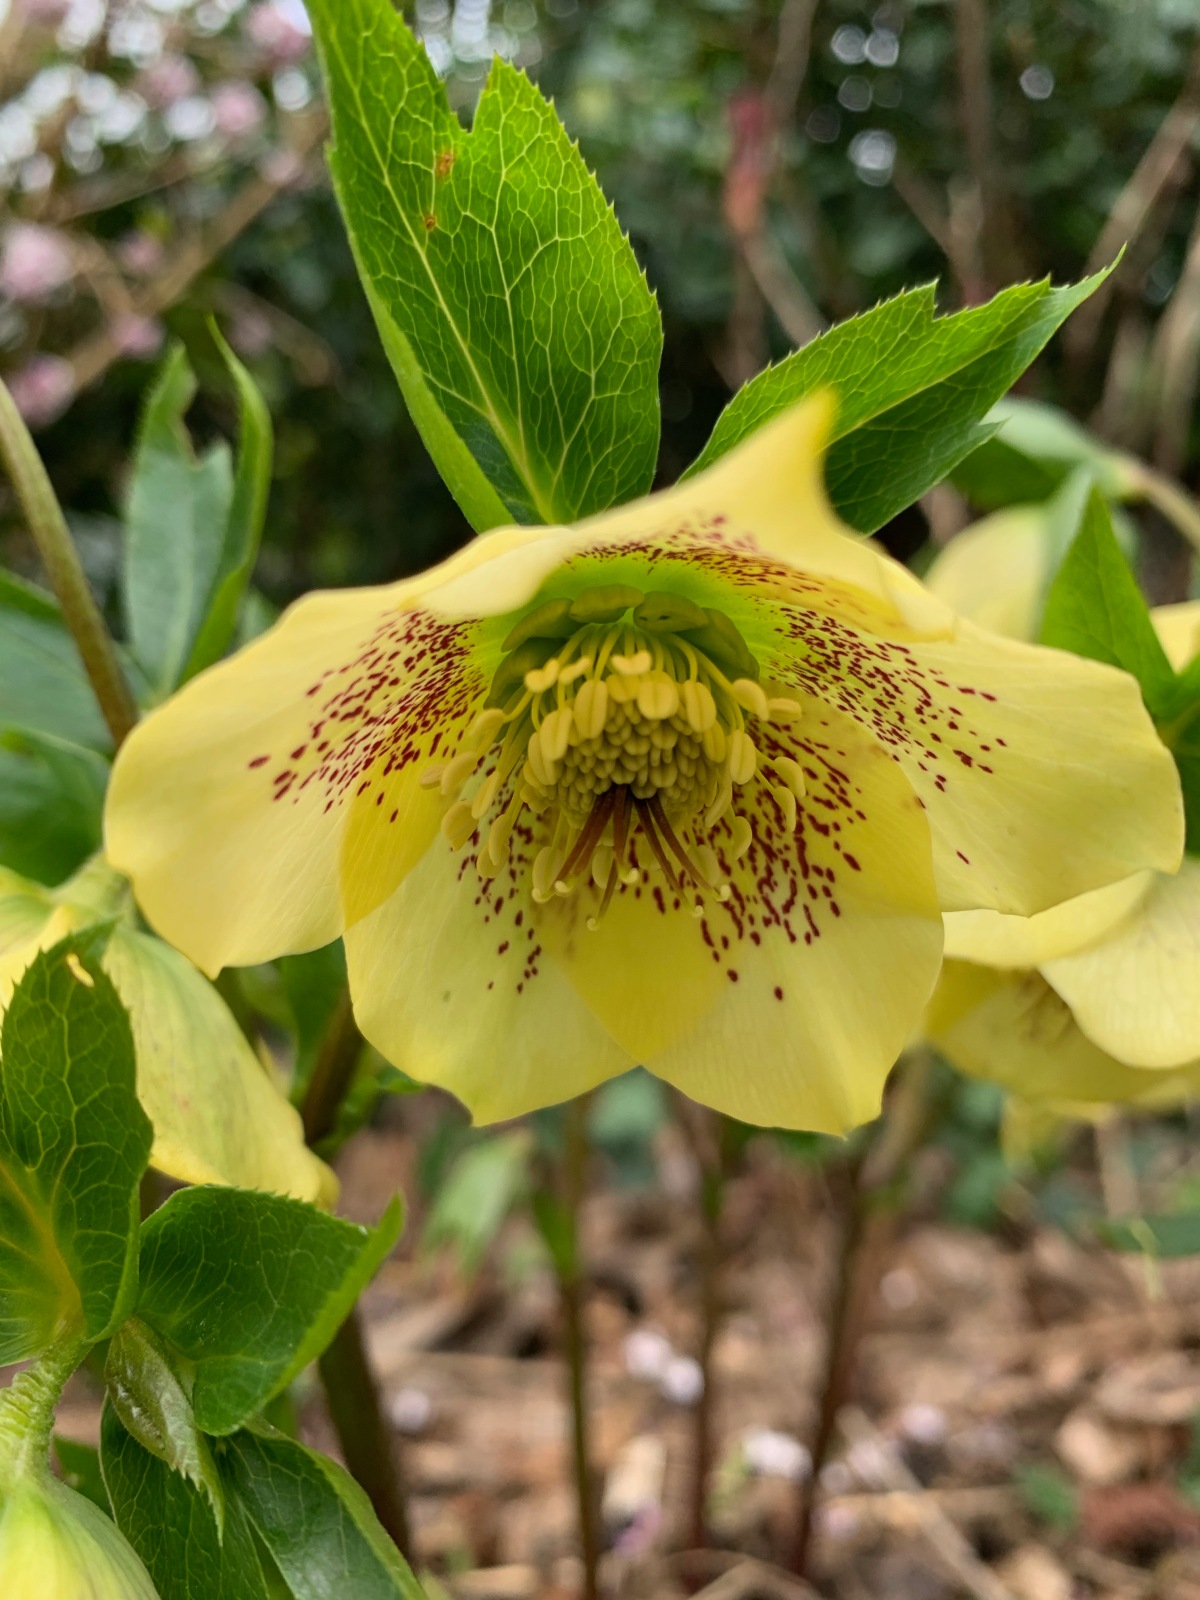 A good year for hellebores